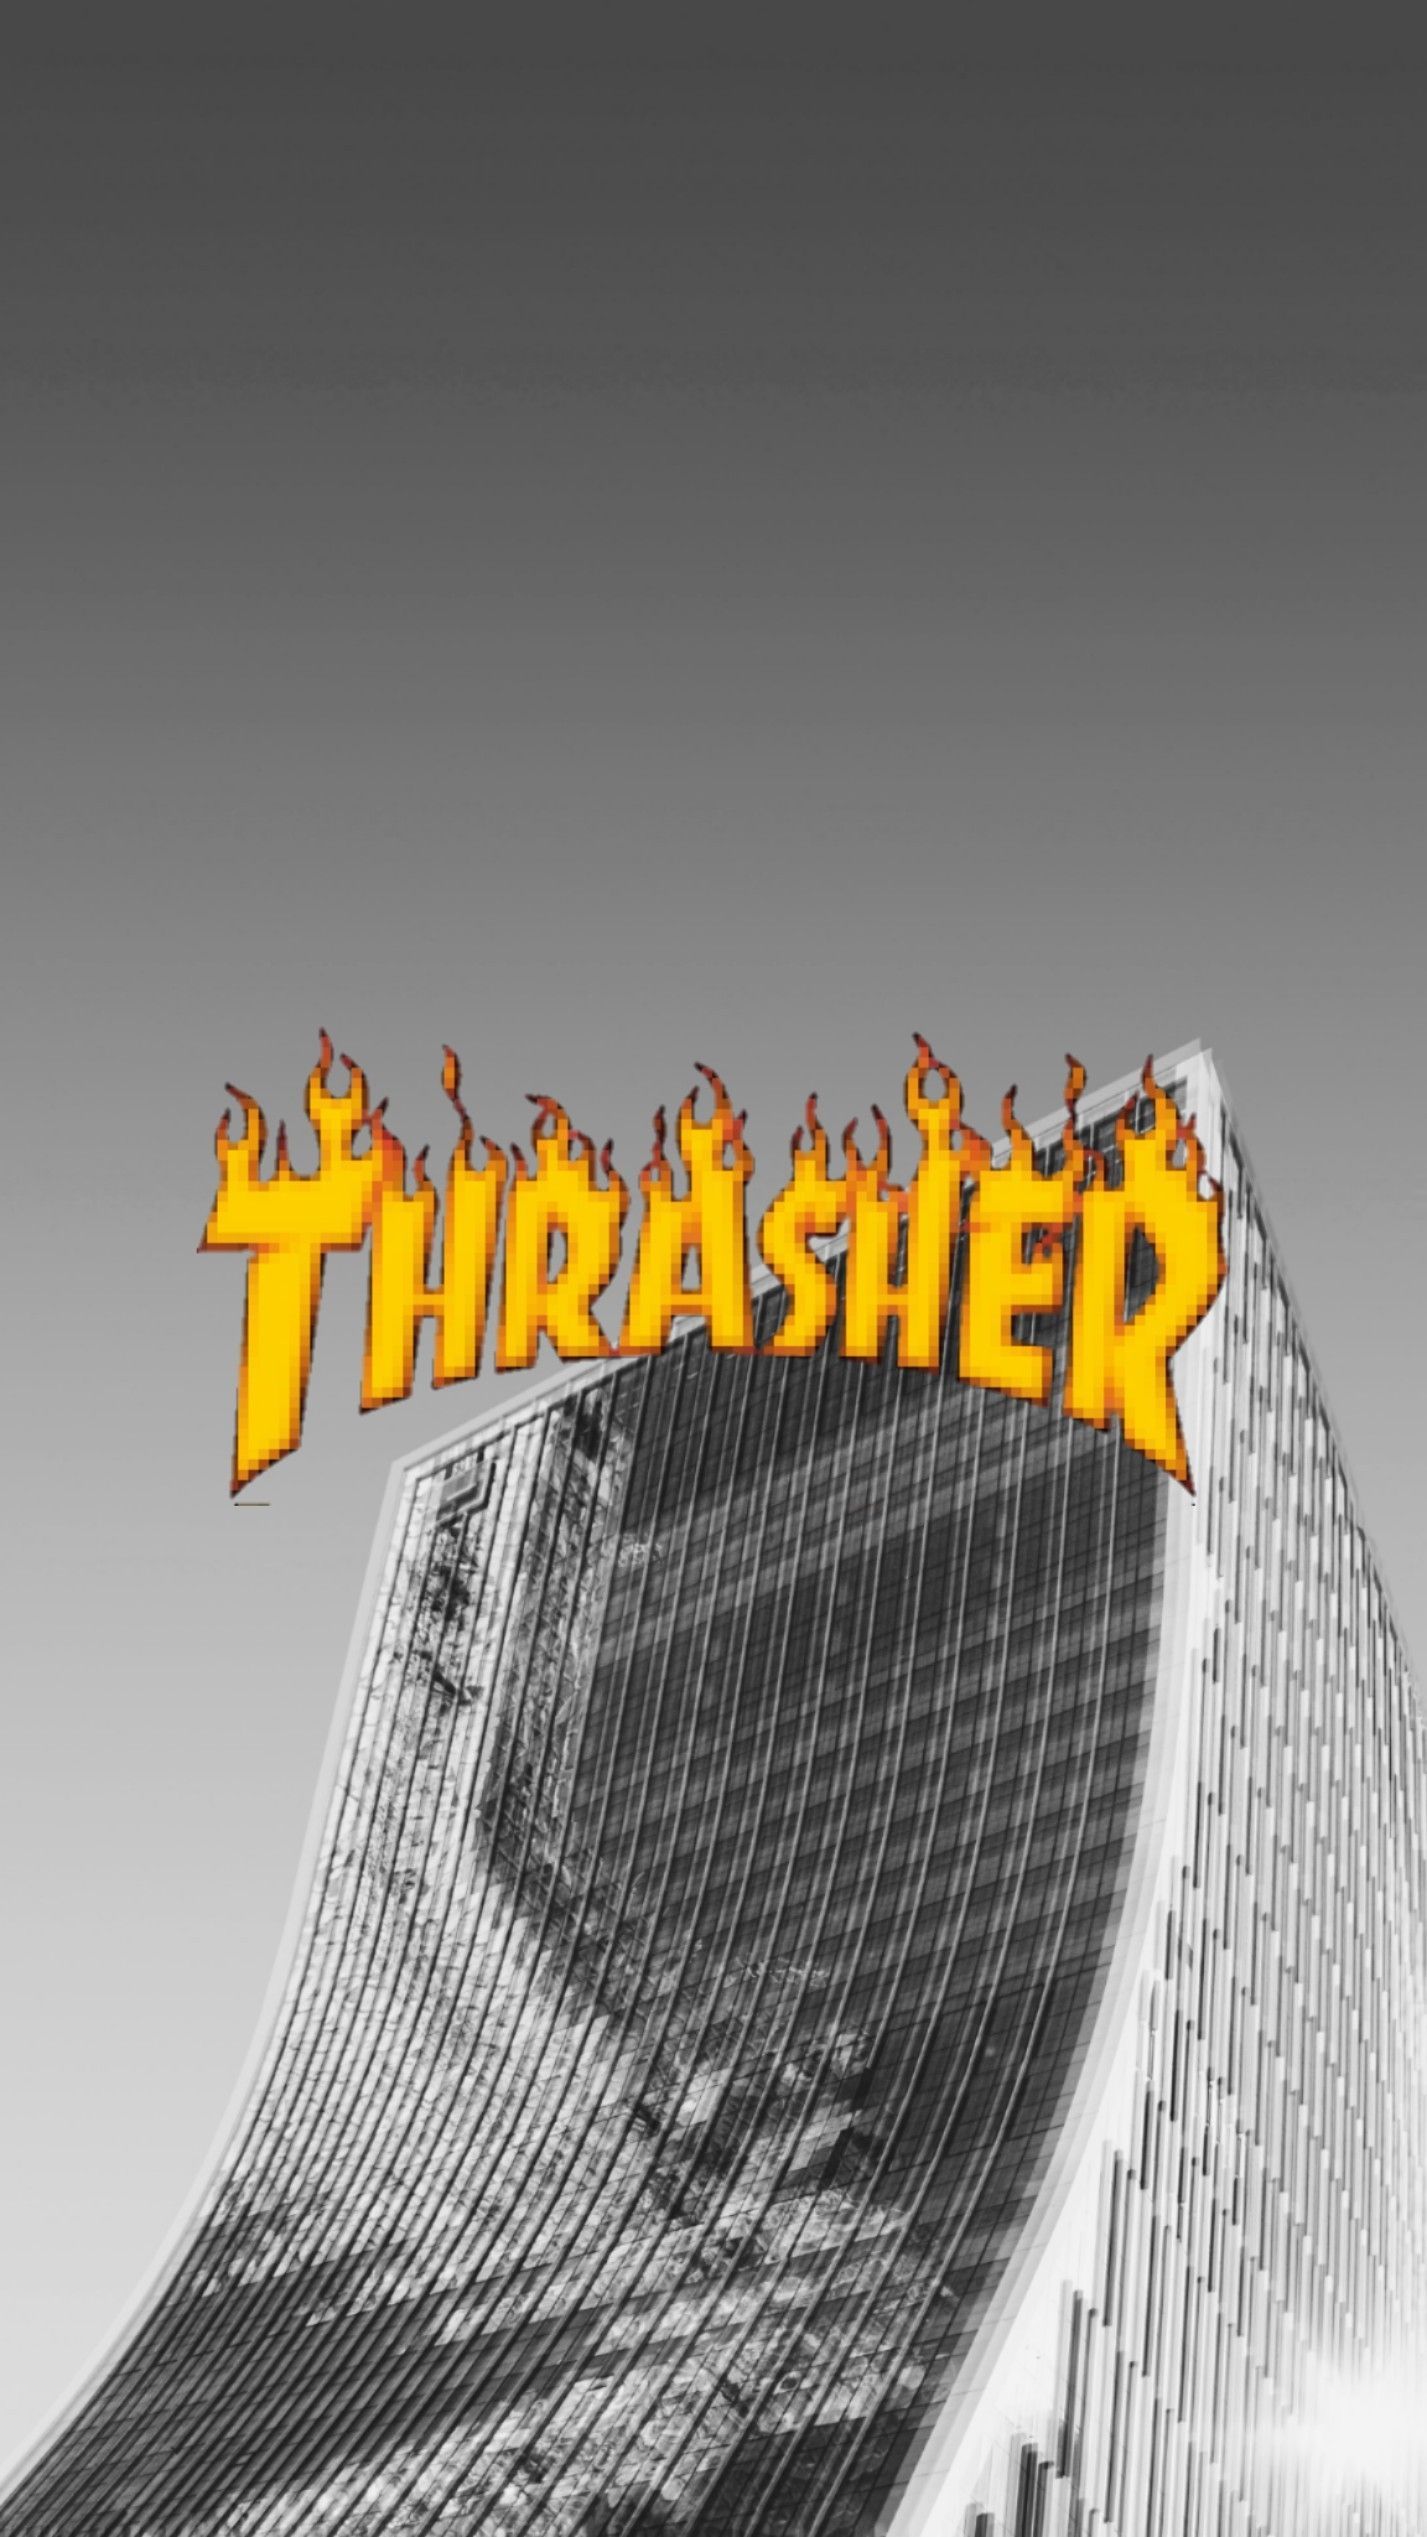 Thrasher Skateboarding iPhone Wallpaper with high-resolution 1080x1920 pixel. You can use this wallpaper for your iPhone 5, 6, 7, 8, X, XS, XR backgrounds, Mobile Screensaver, or iPad Lock Screen - Thrasher